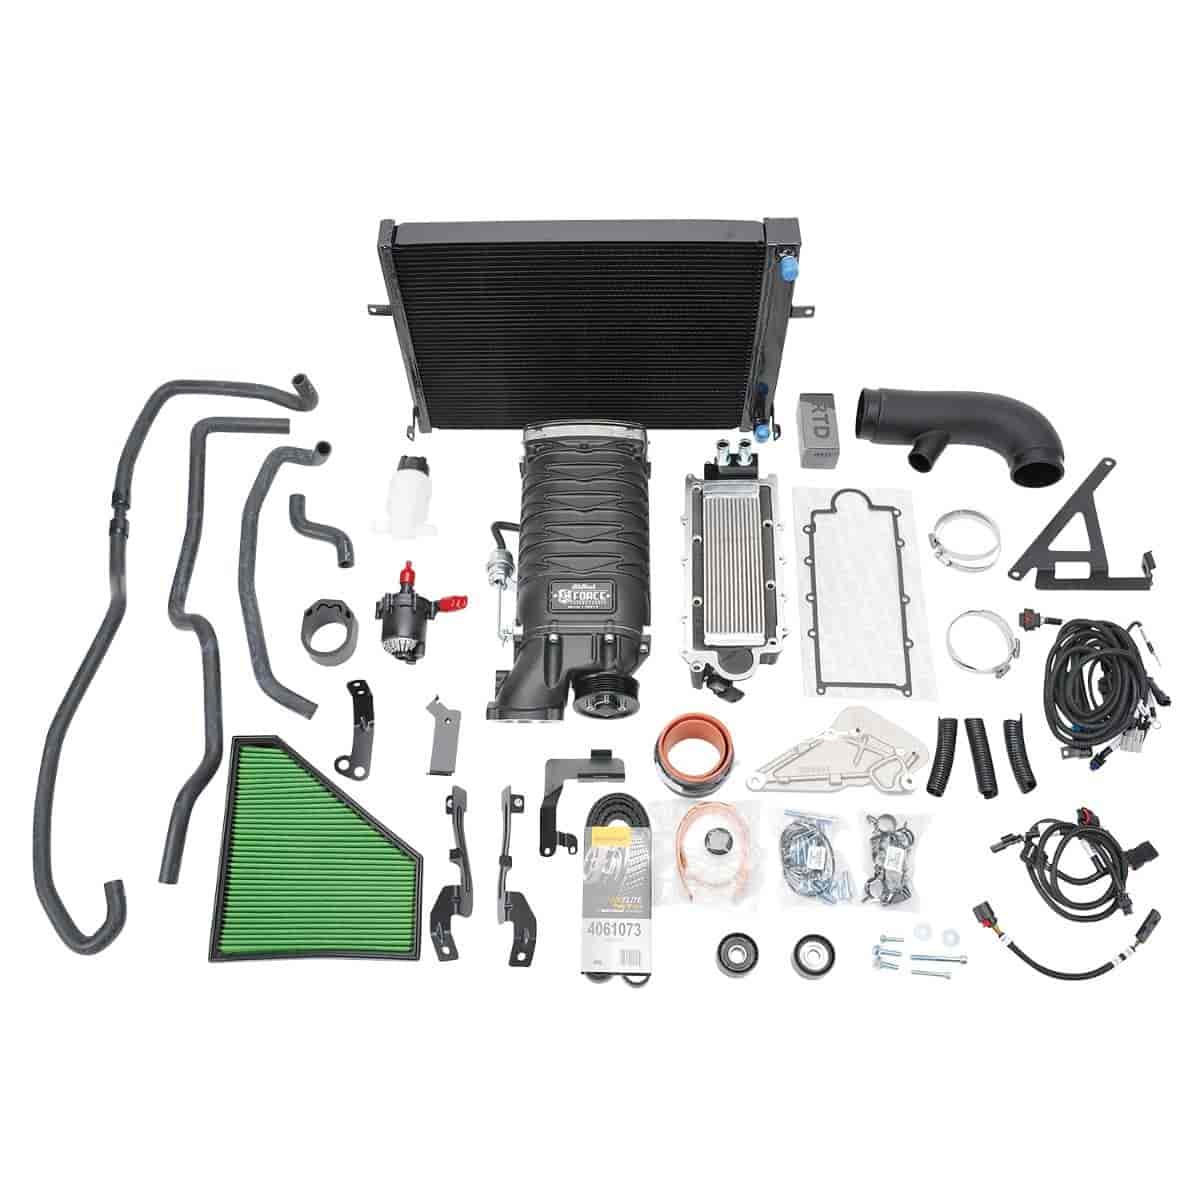 E-Force Stage-1 Supercharger System fits Select Late-Model Chevy Camaro 3.6L V6 [Tuner Not Included]